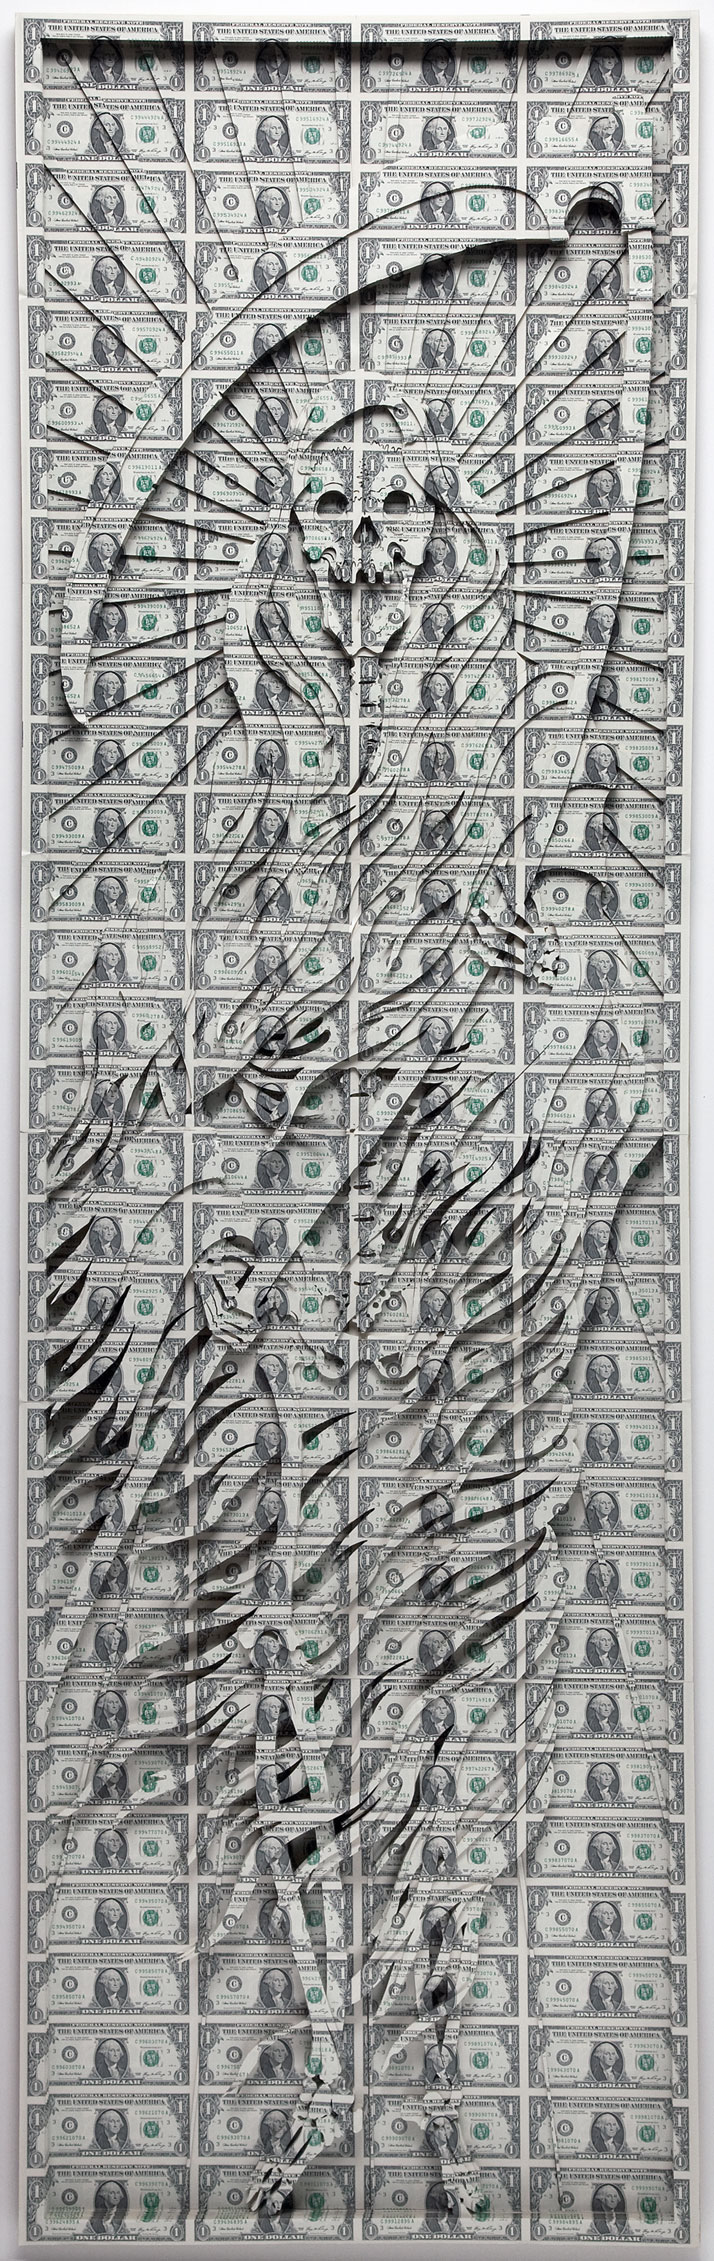 Scott Campbell’s Skulls made of US Currency.